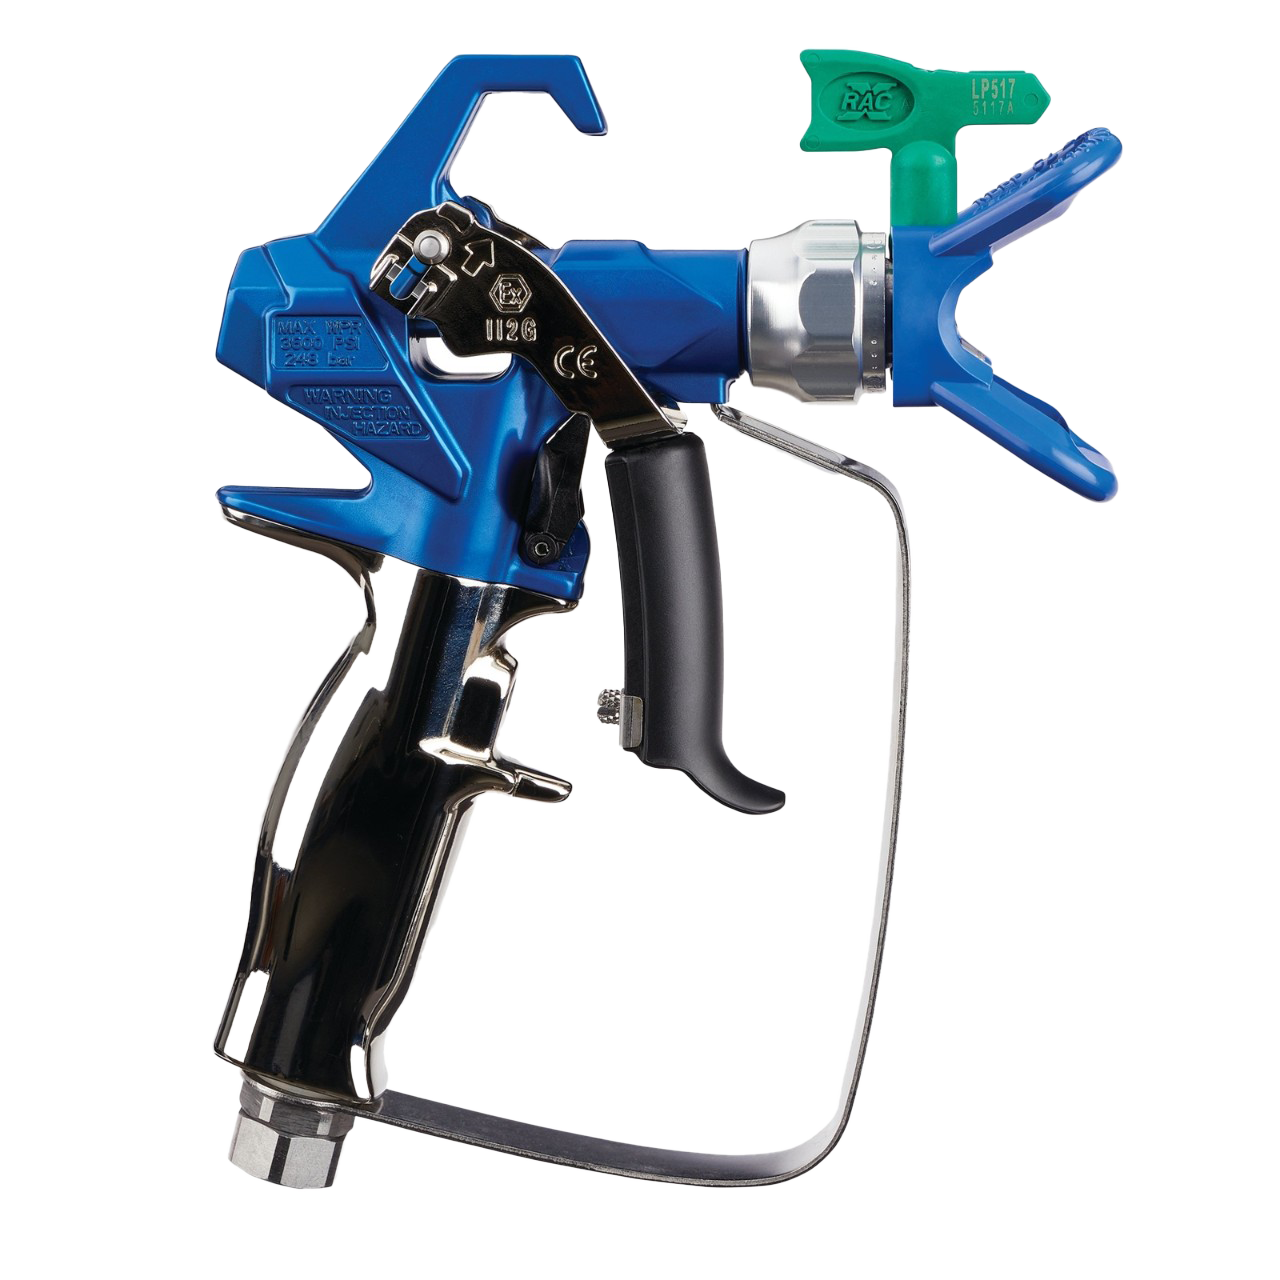 FUNTECK Airless Spray Gun Compatible with Graco Airless Paint Sprayers,  Including 517 Tip and Nozzle Gurad, 3600 PSI